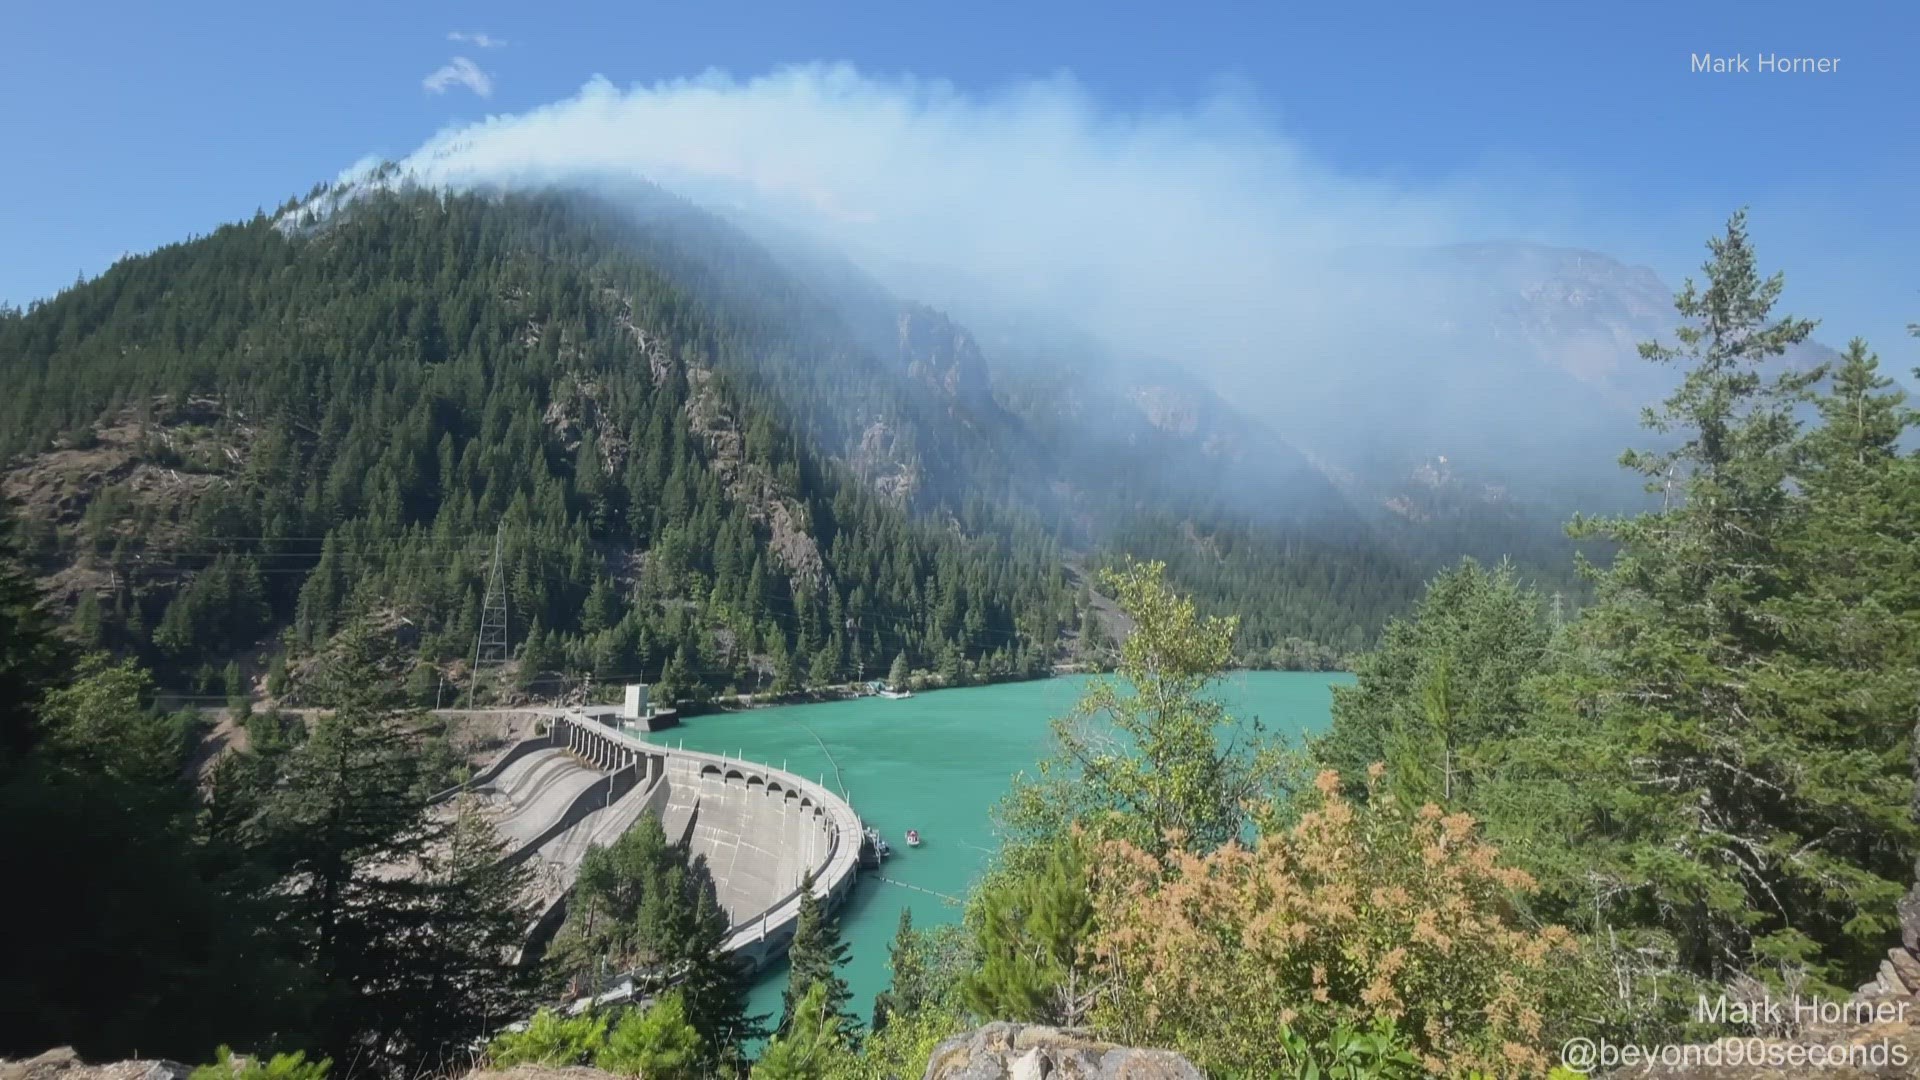 Seattle City Light says power-generating dams are safe for now, but it is monitoring the fire near the Skagit Hydroelectric Project closely.